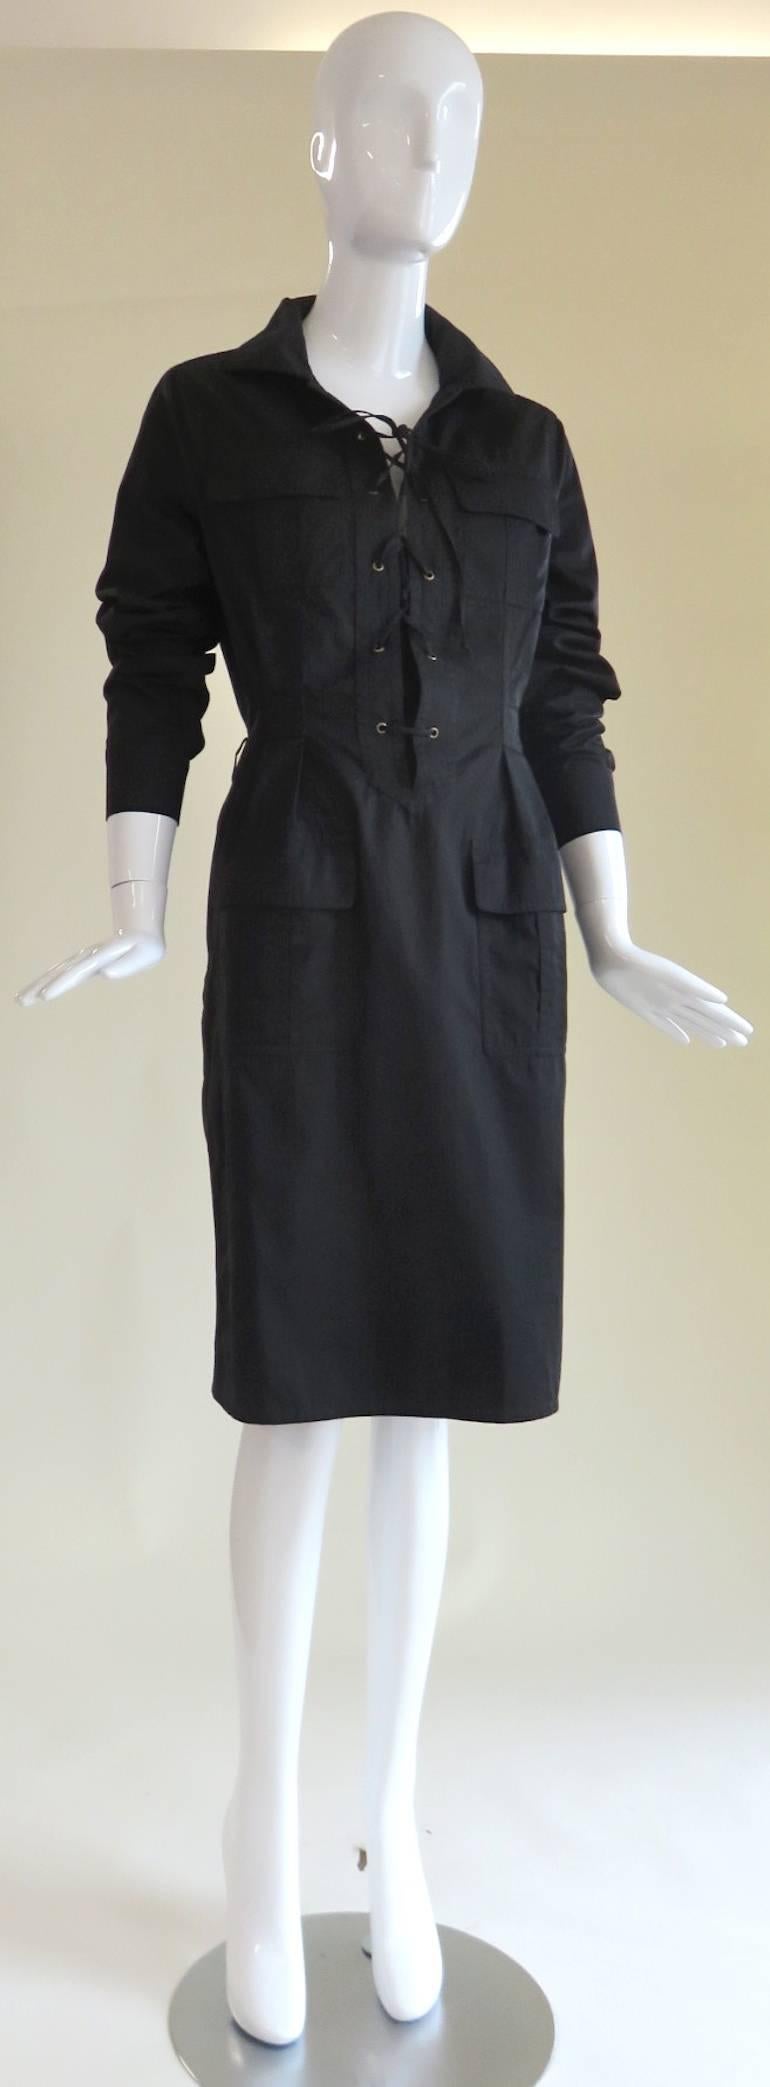 Great condition, YVES SAINT LAURENT Tom Ford Black Cotton Safari Dress.

Iconic safari, lace-up neckline front design.

Twin chest, and waist level flap pockets.

Cotton fabrication.

Made in Italy, as labeled. 

*MEASUREMENTS &